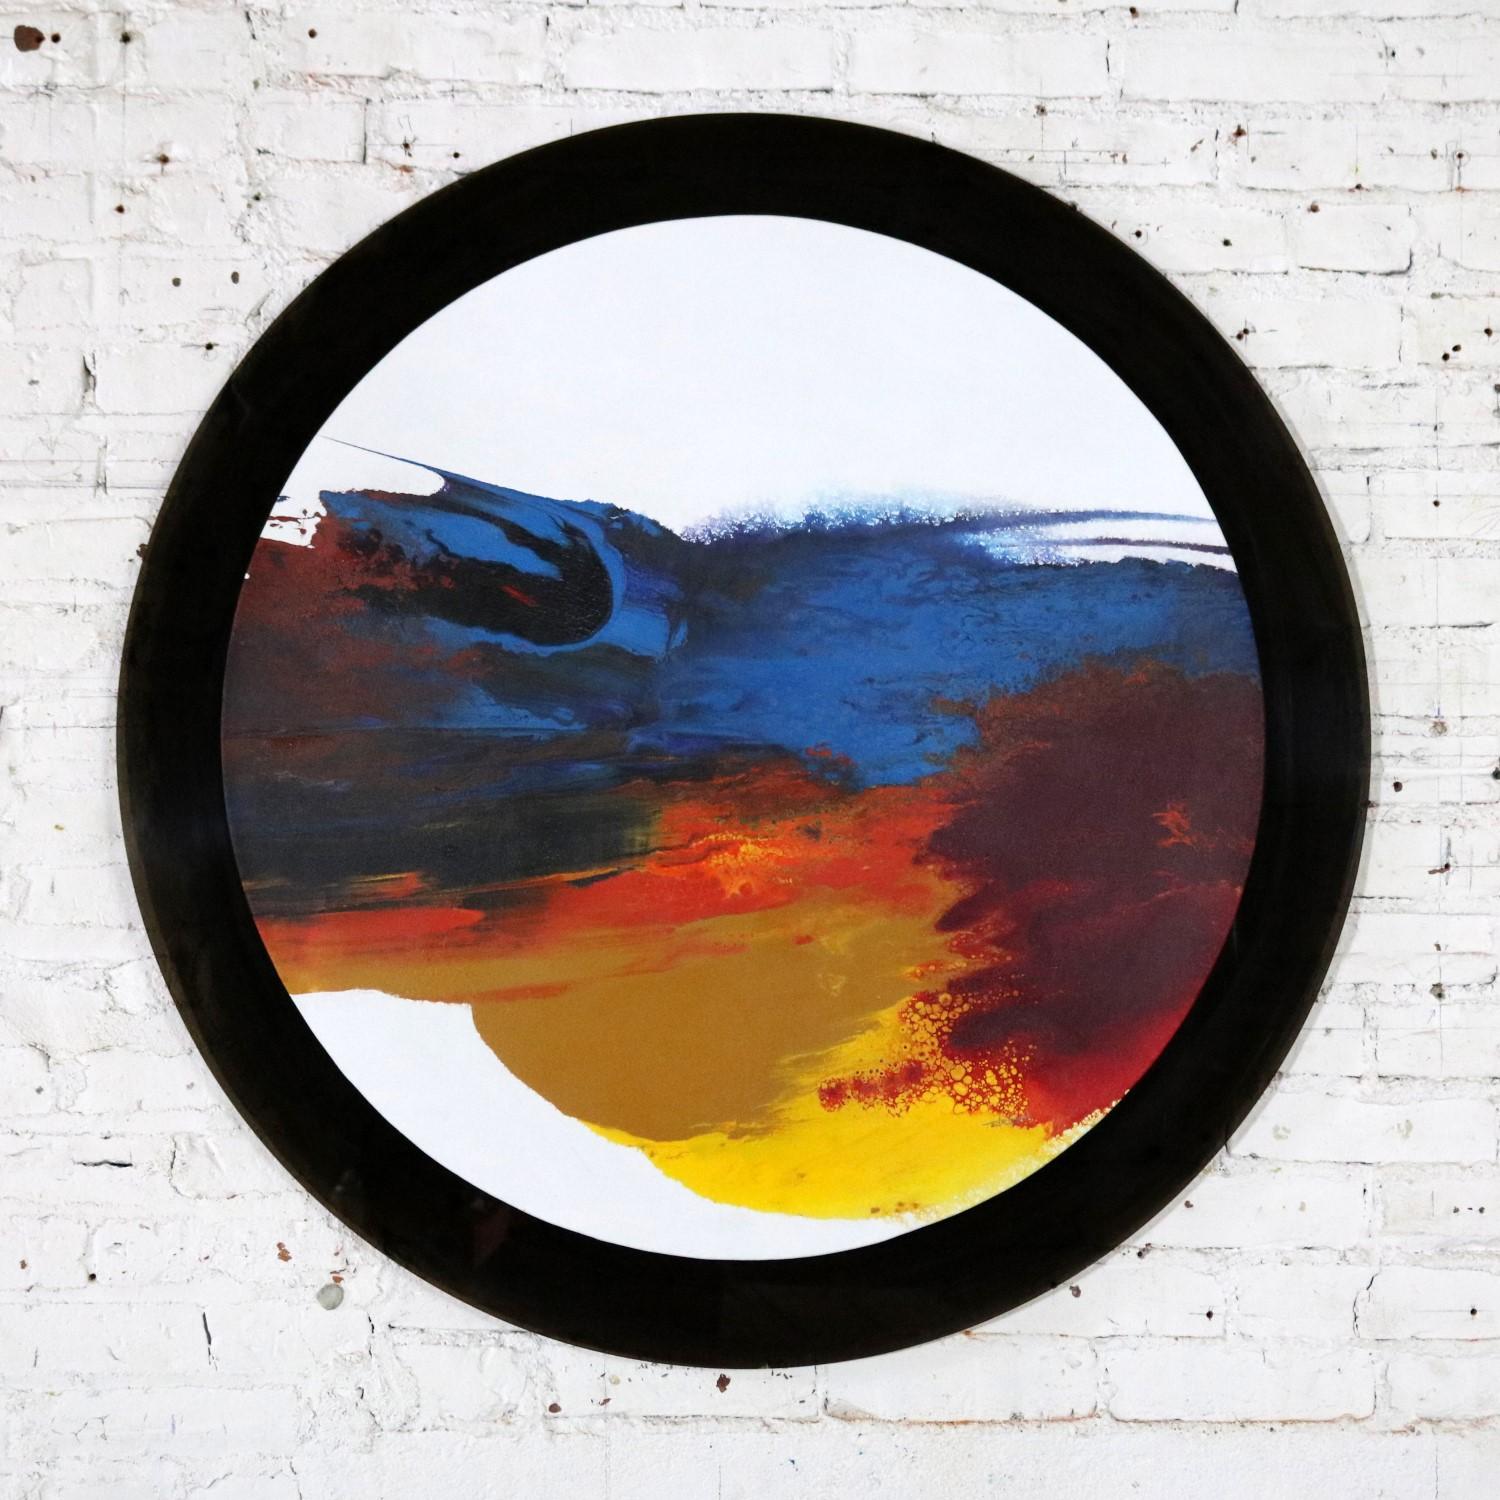 Awesome untitled round abstract acrylic painting signed by listed artist Ted R. Lownik. This painting is mounted on round smoke gray plexiglass as its framing. Very wonderful and vibrant piece and in excellent condition, circa 1970s-1980s.

Bold,